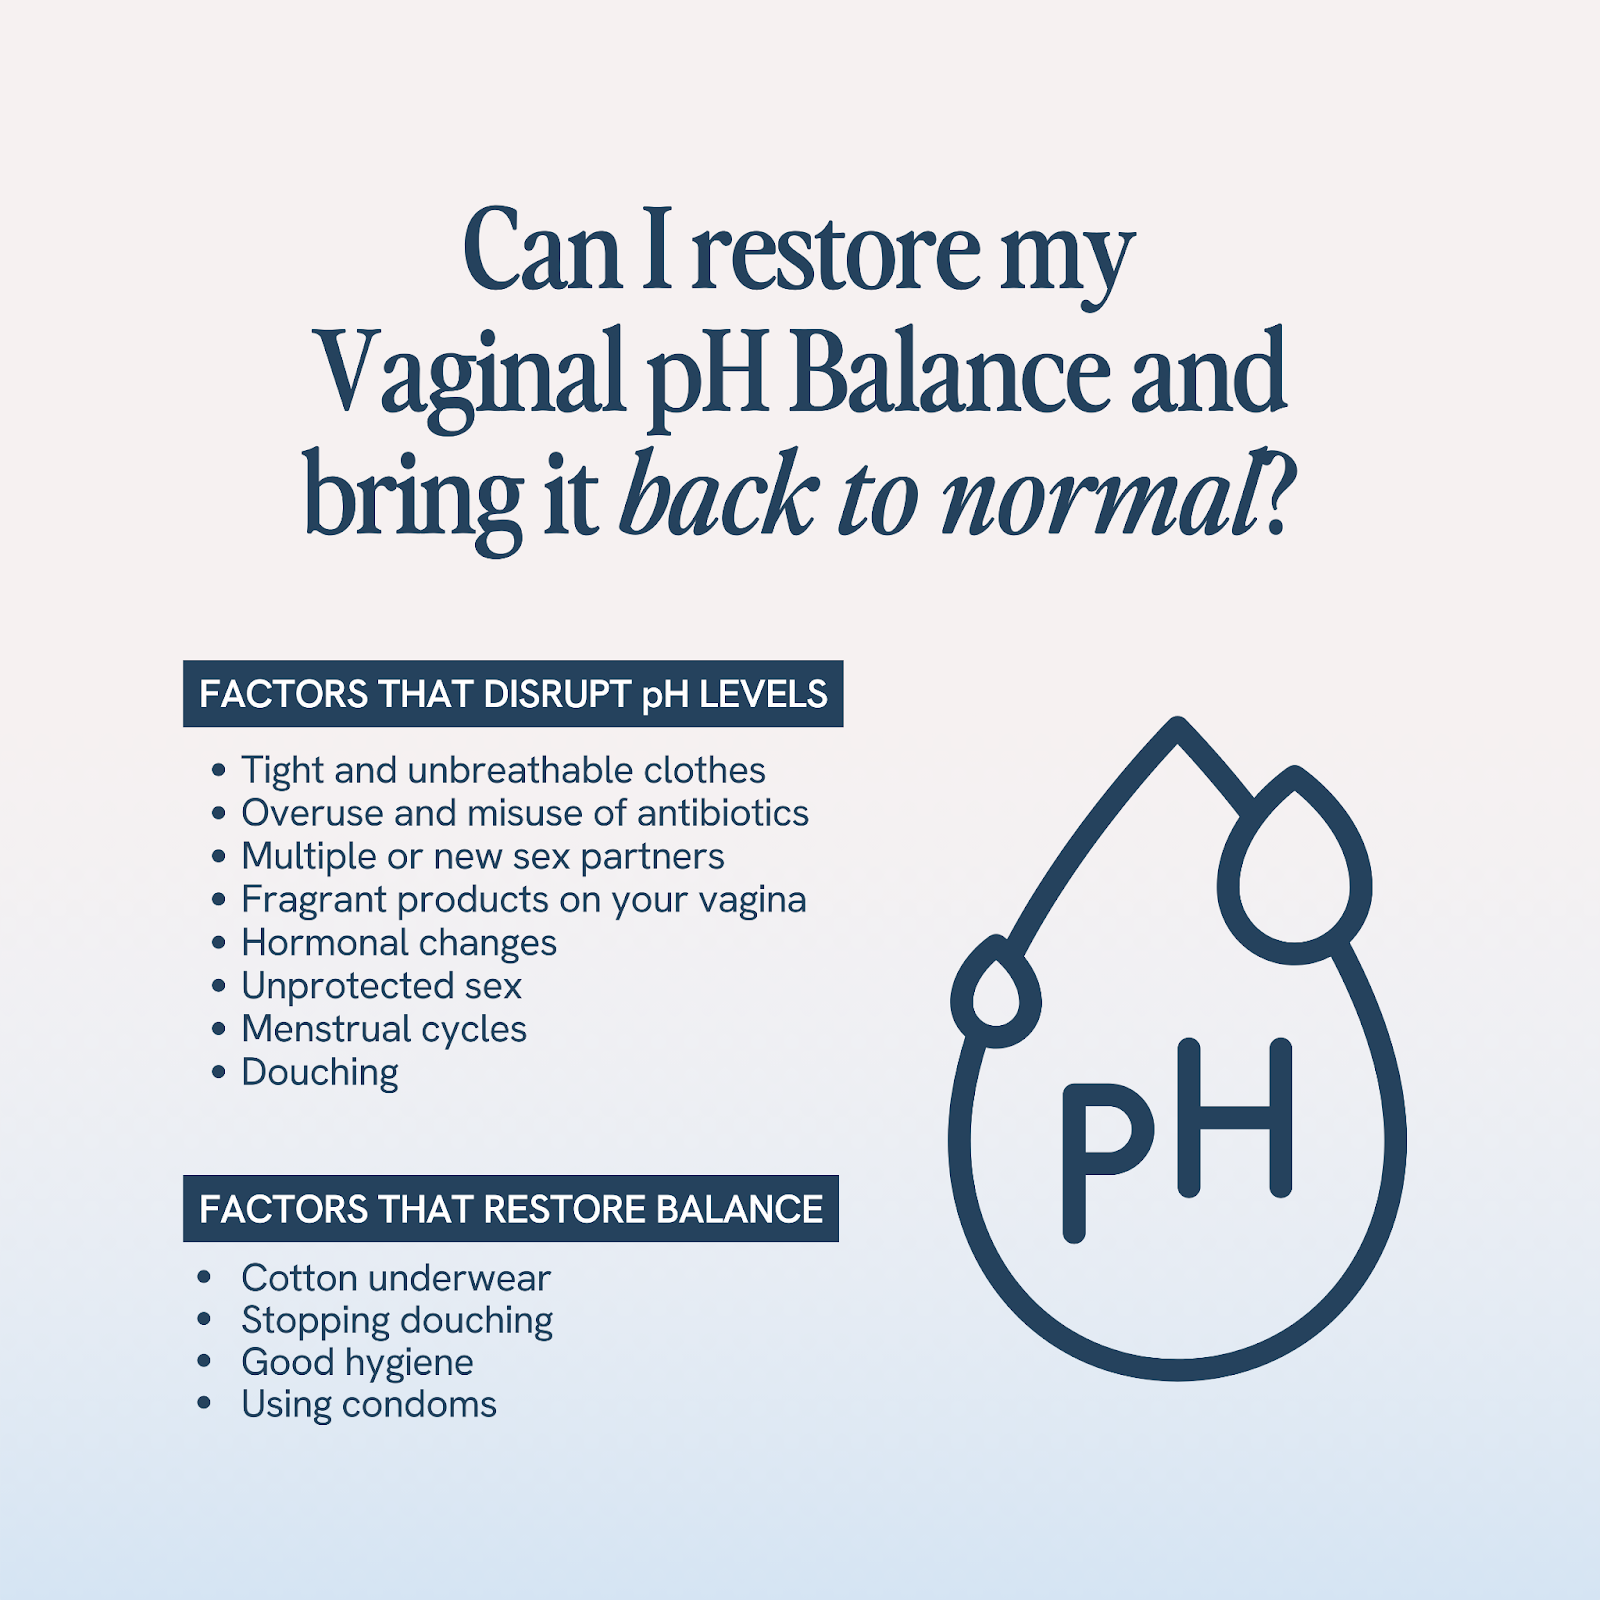 A health infographic questioning 'Can I restore my Vaginal pH Balance and bring it back to normal?' lists disrupting factors like tight clothing and antibiotics, and restorative measures like cotton underwear and good hygiene, alongside a pH water drop symbol